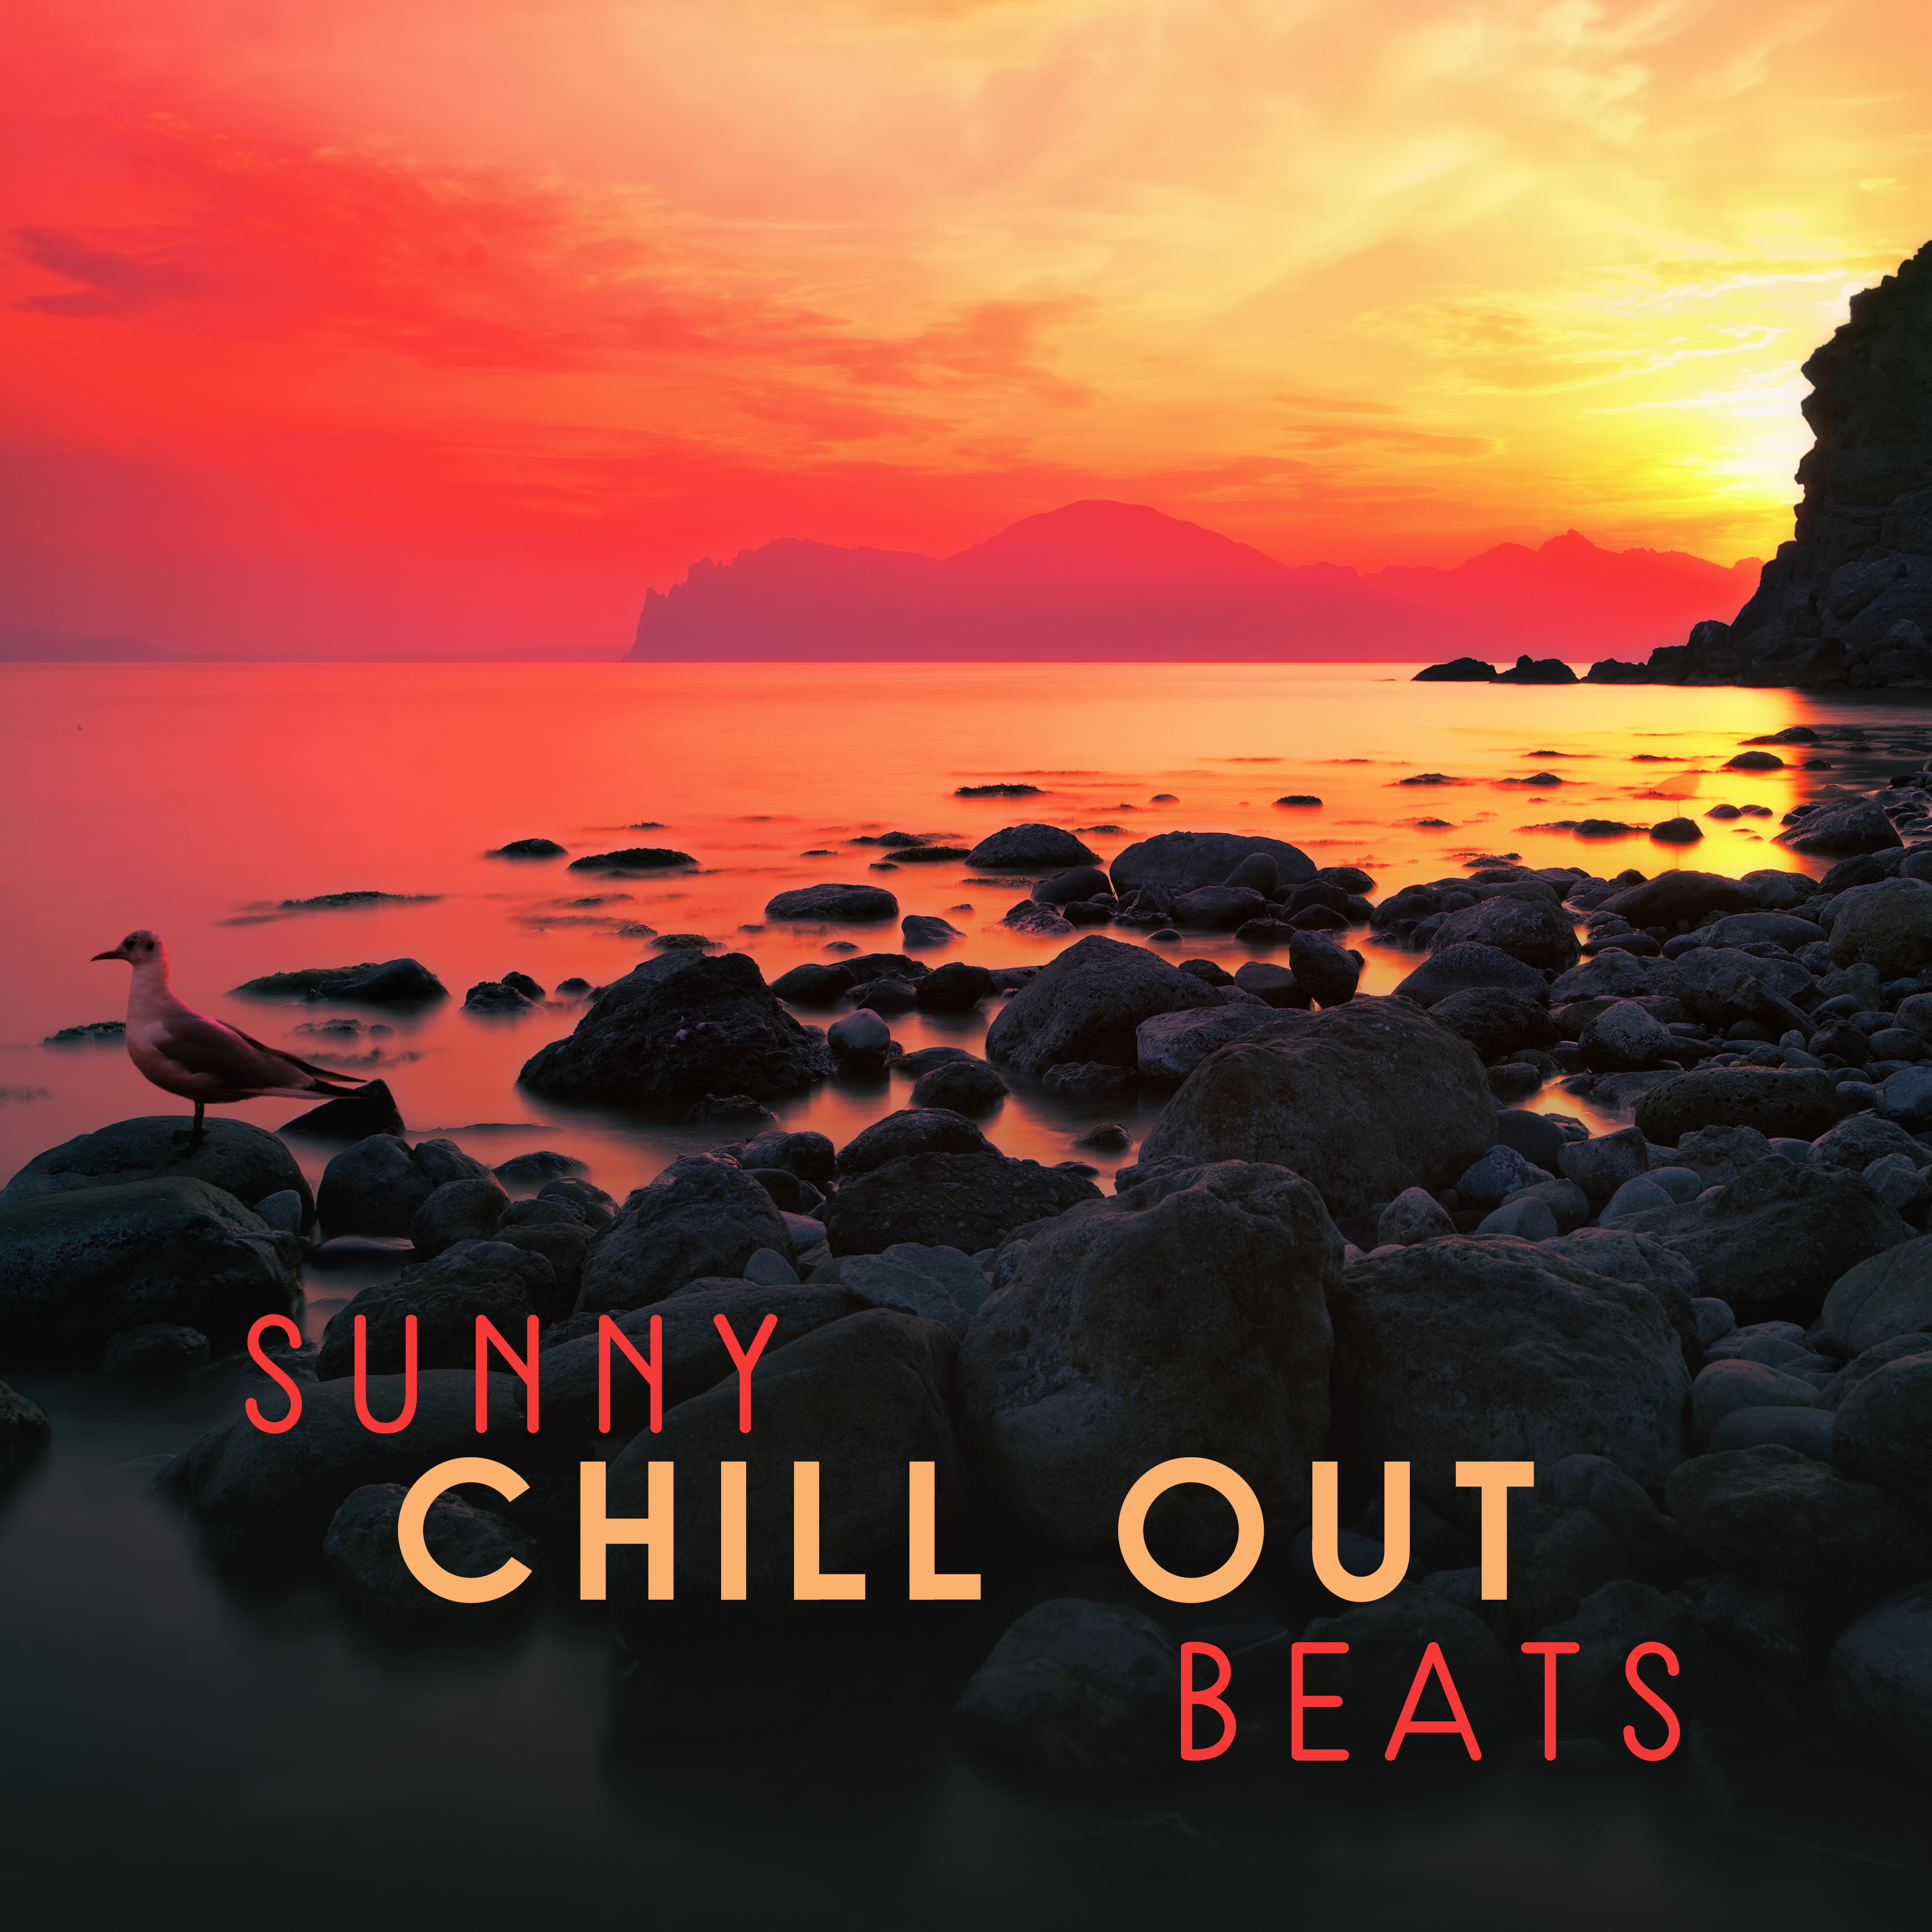 Sunny Chill Out Beats – Beach Relaxation, Calm Vibes to Rest, Beautiful Memories